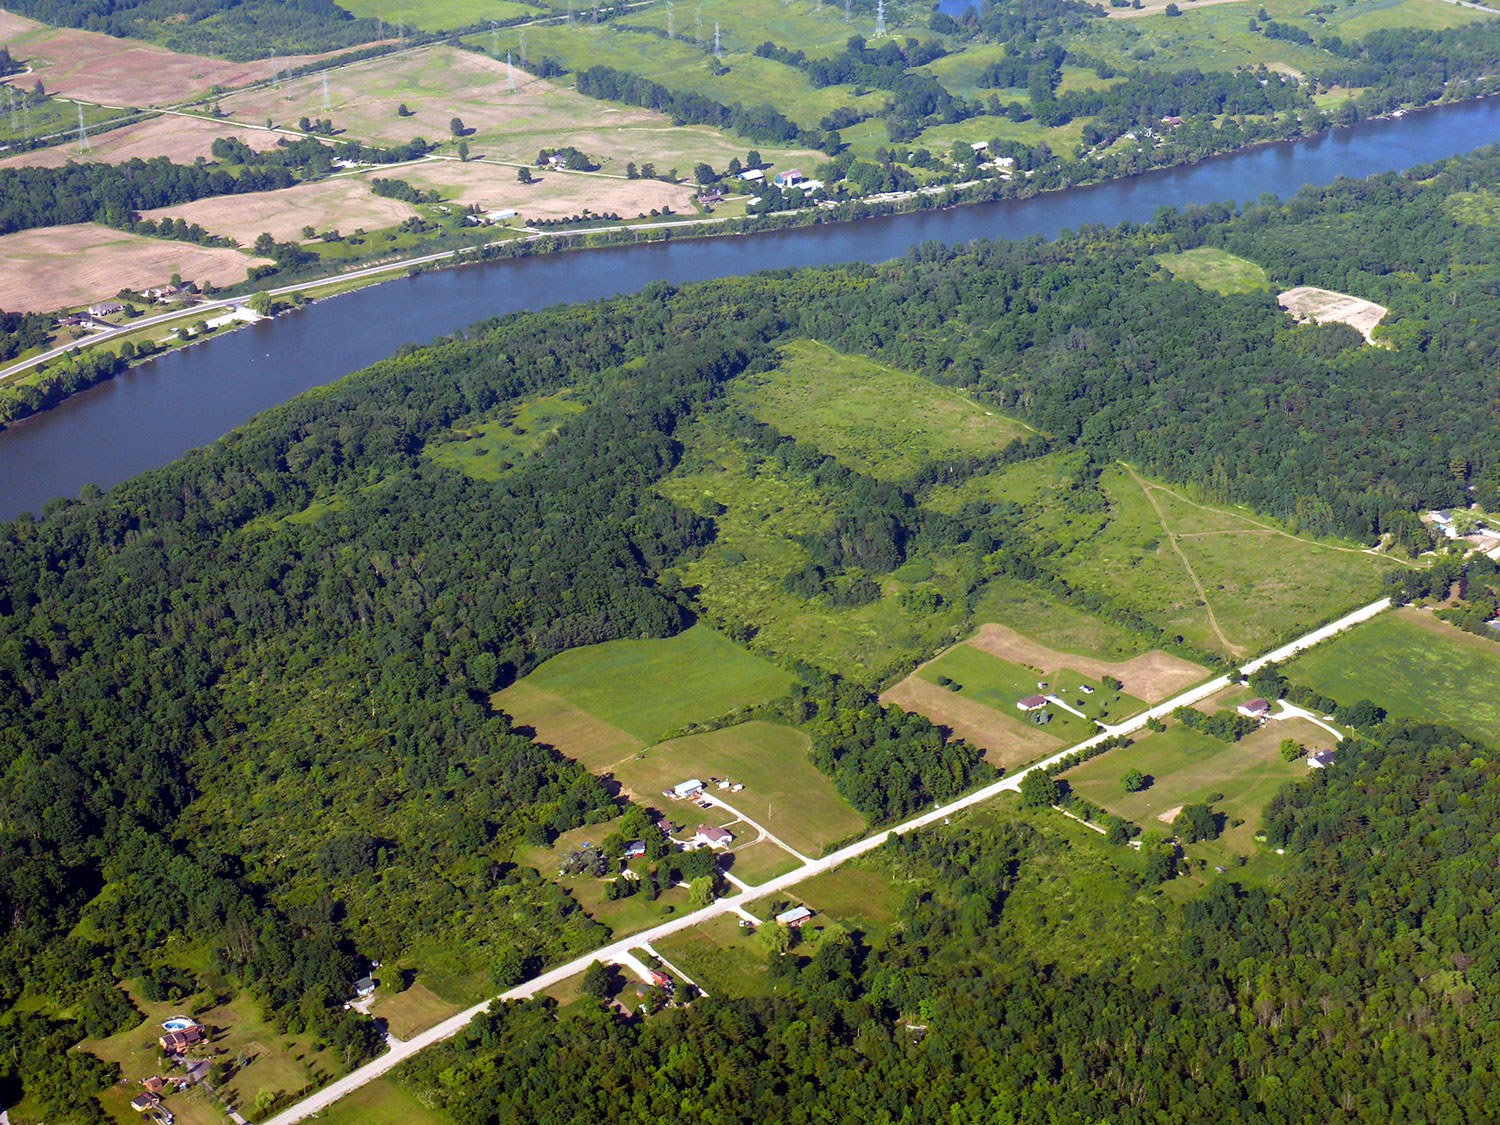 Aerial view of Grand River. Photo: Ann and Peter Macdonald